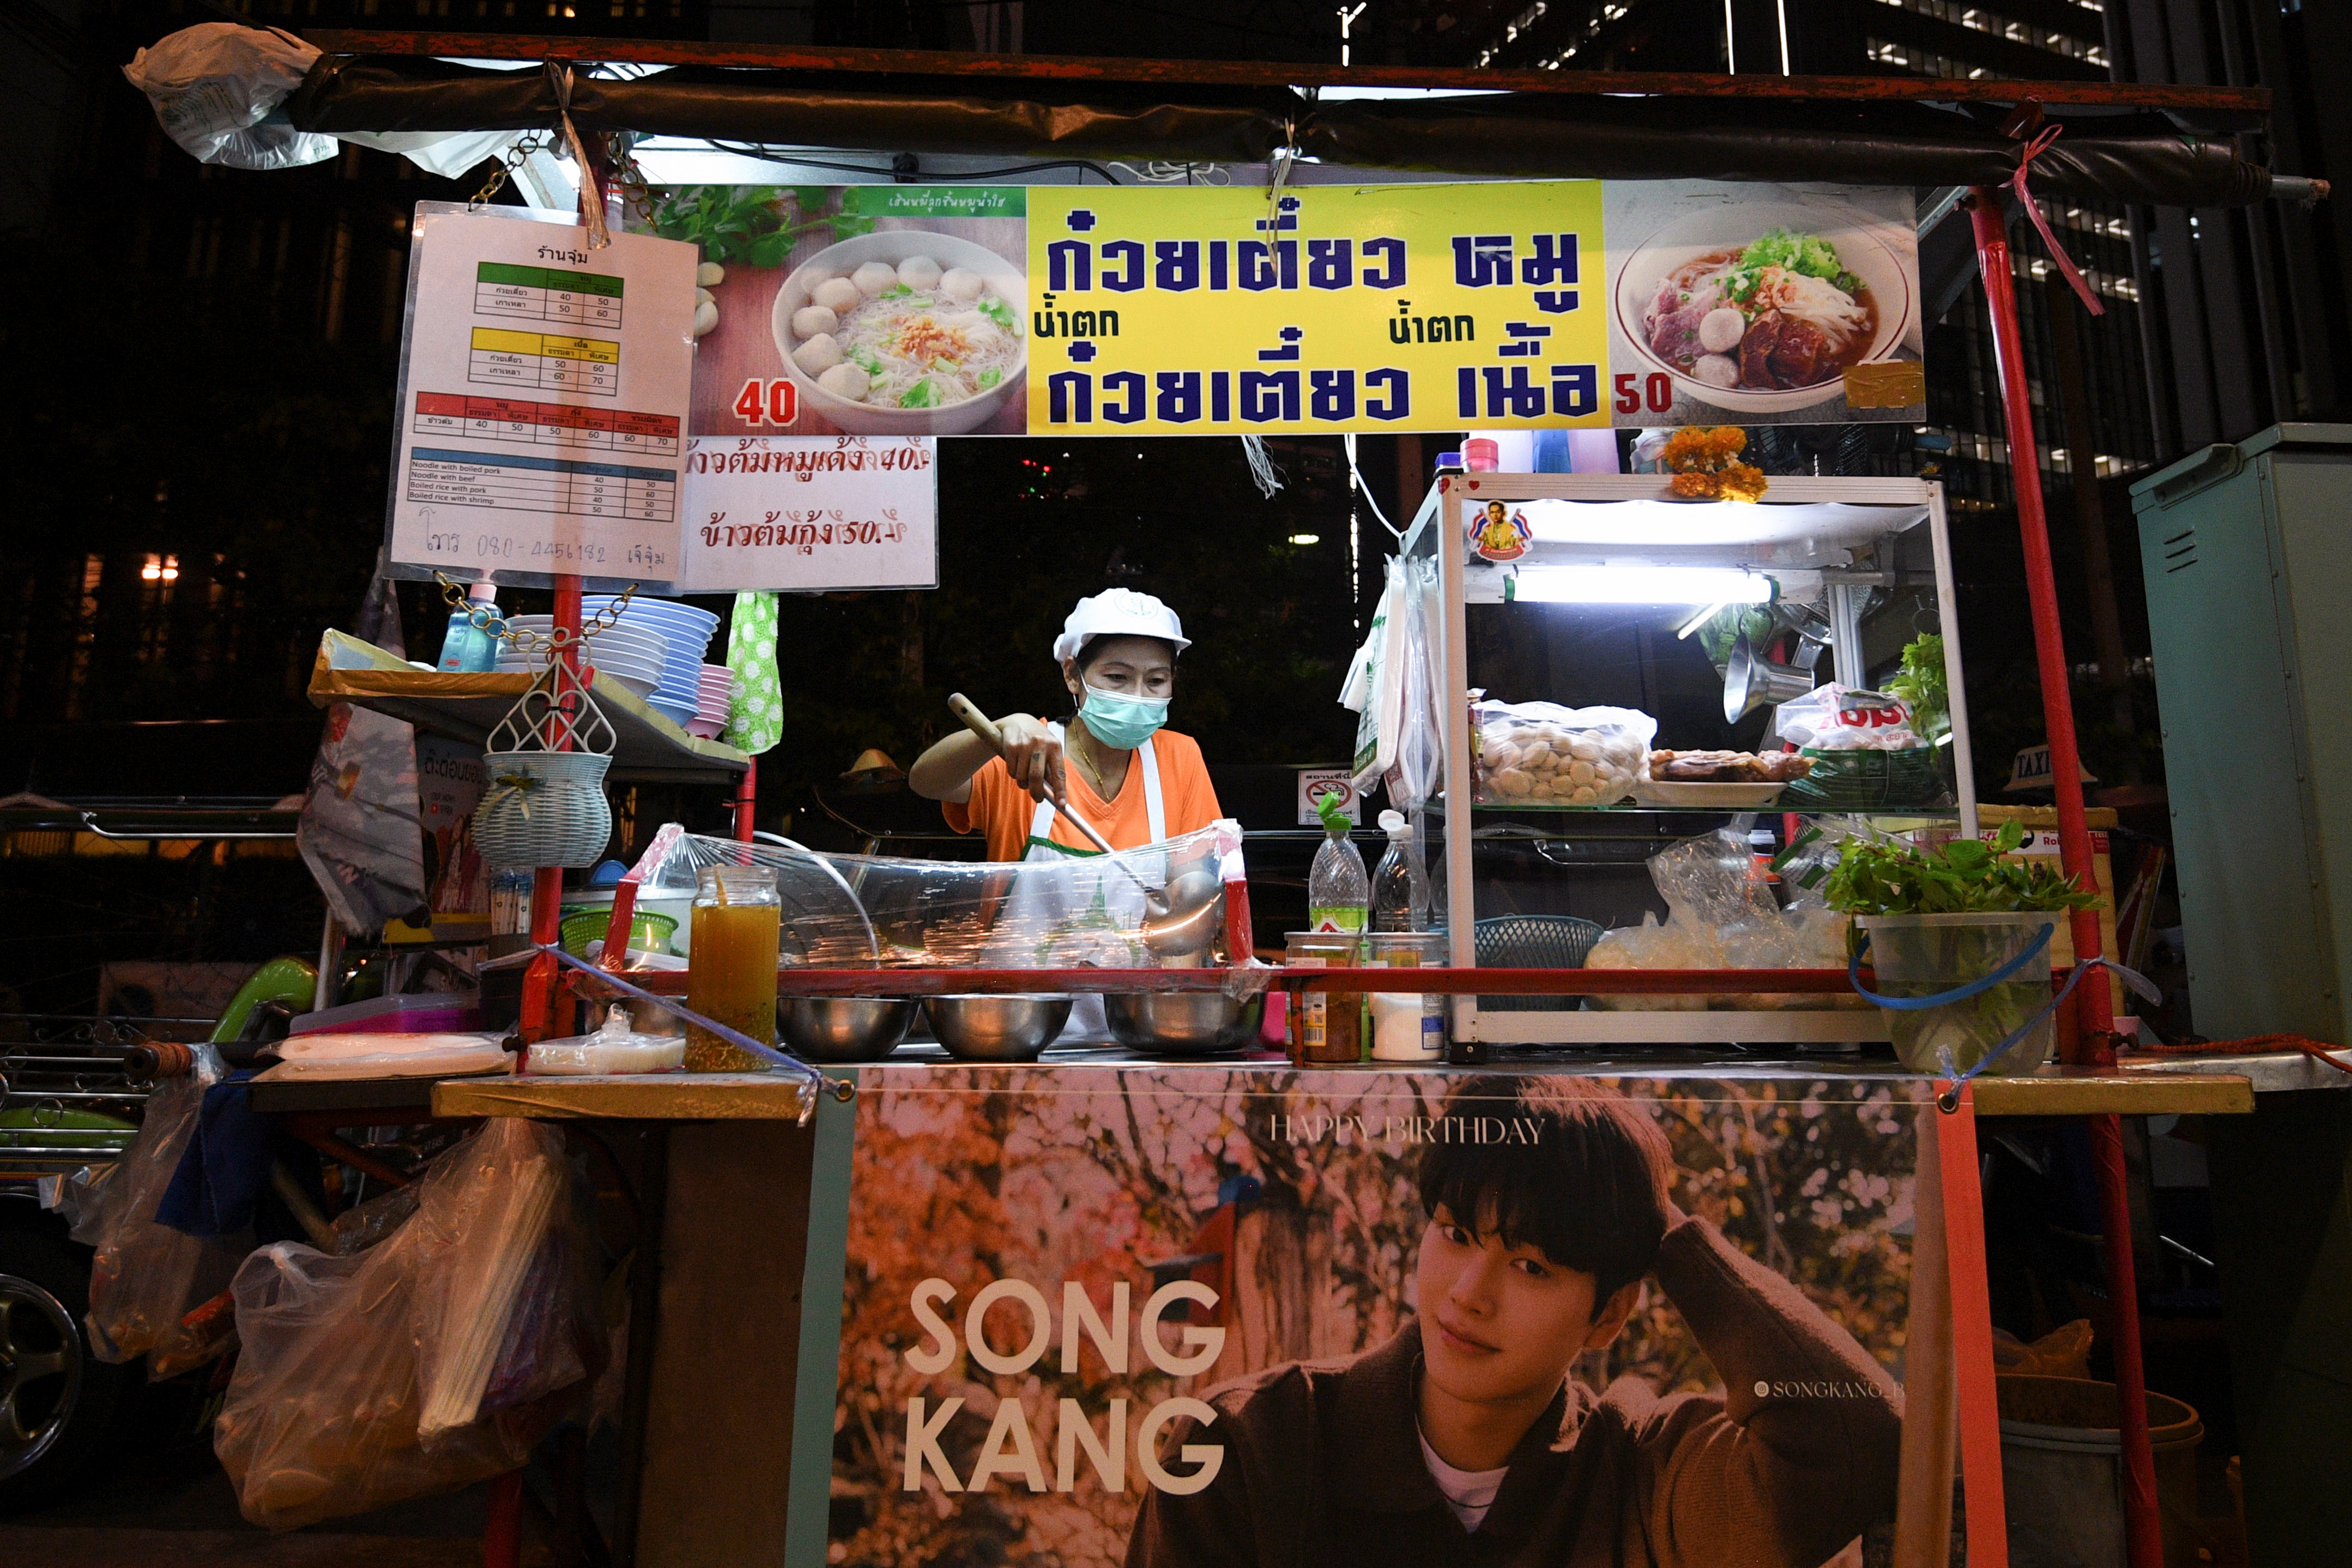 A woman selling street food has her stall decorated with a banner of Korean star Song Kang in Bangkok